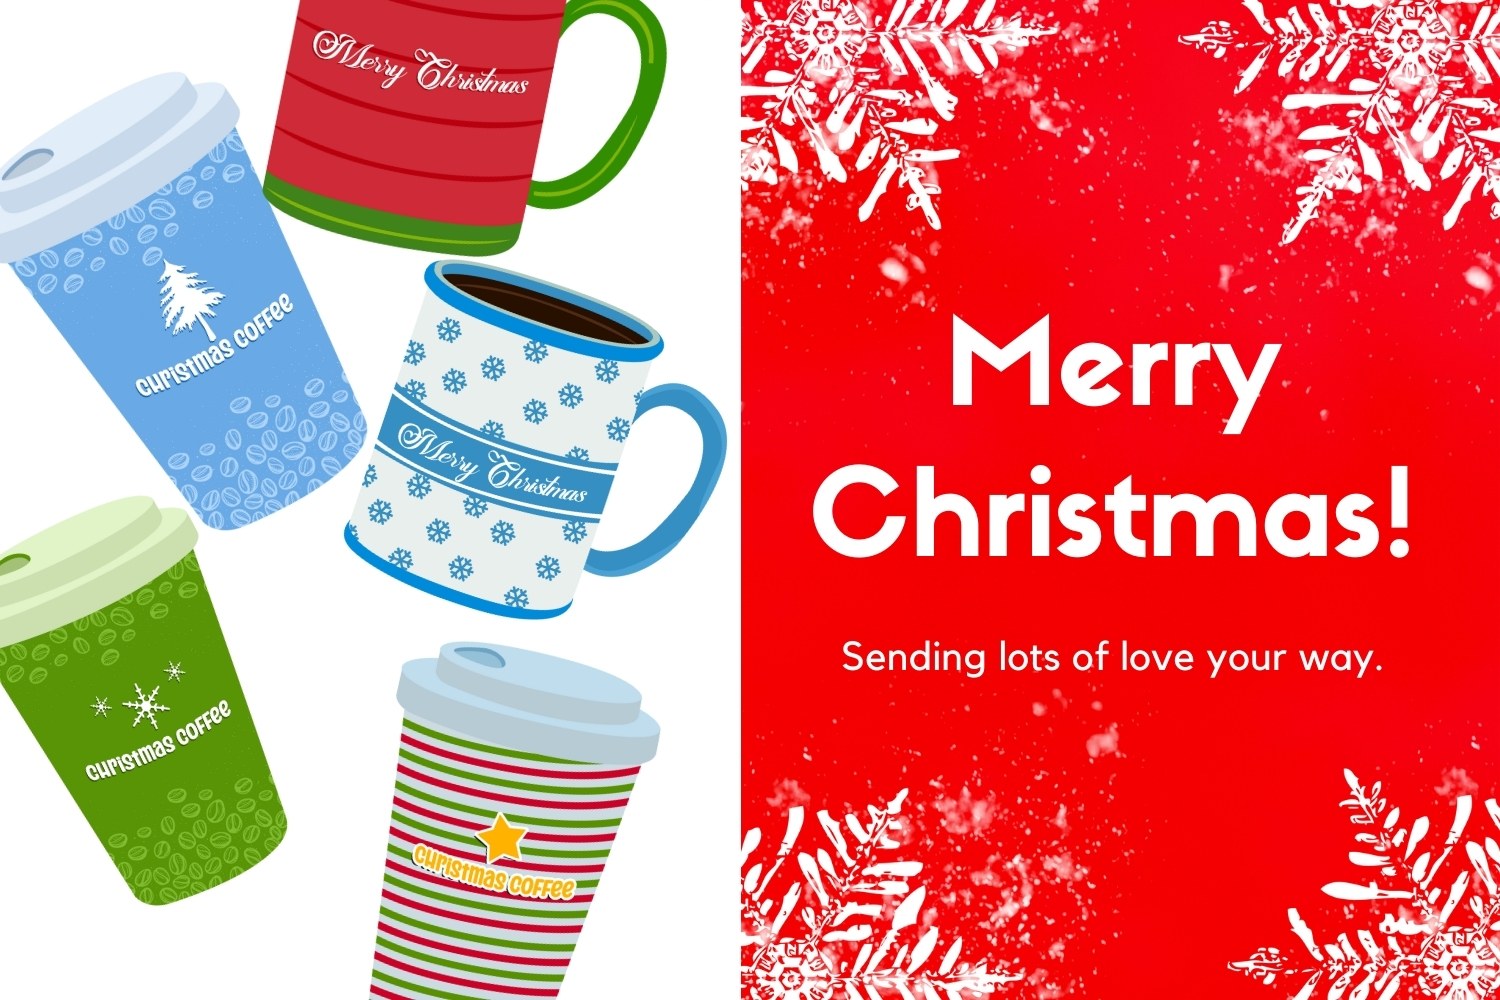 Merry Christmas Coffee Preview image.